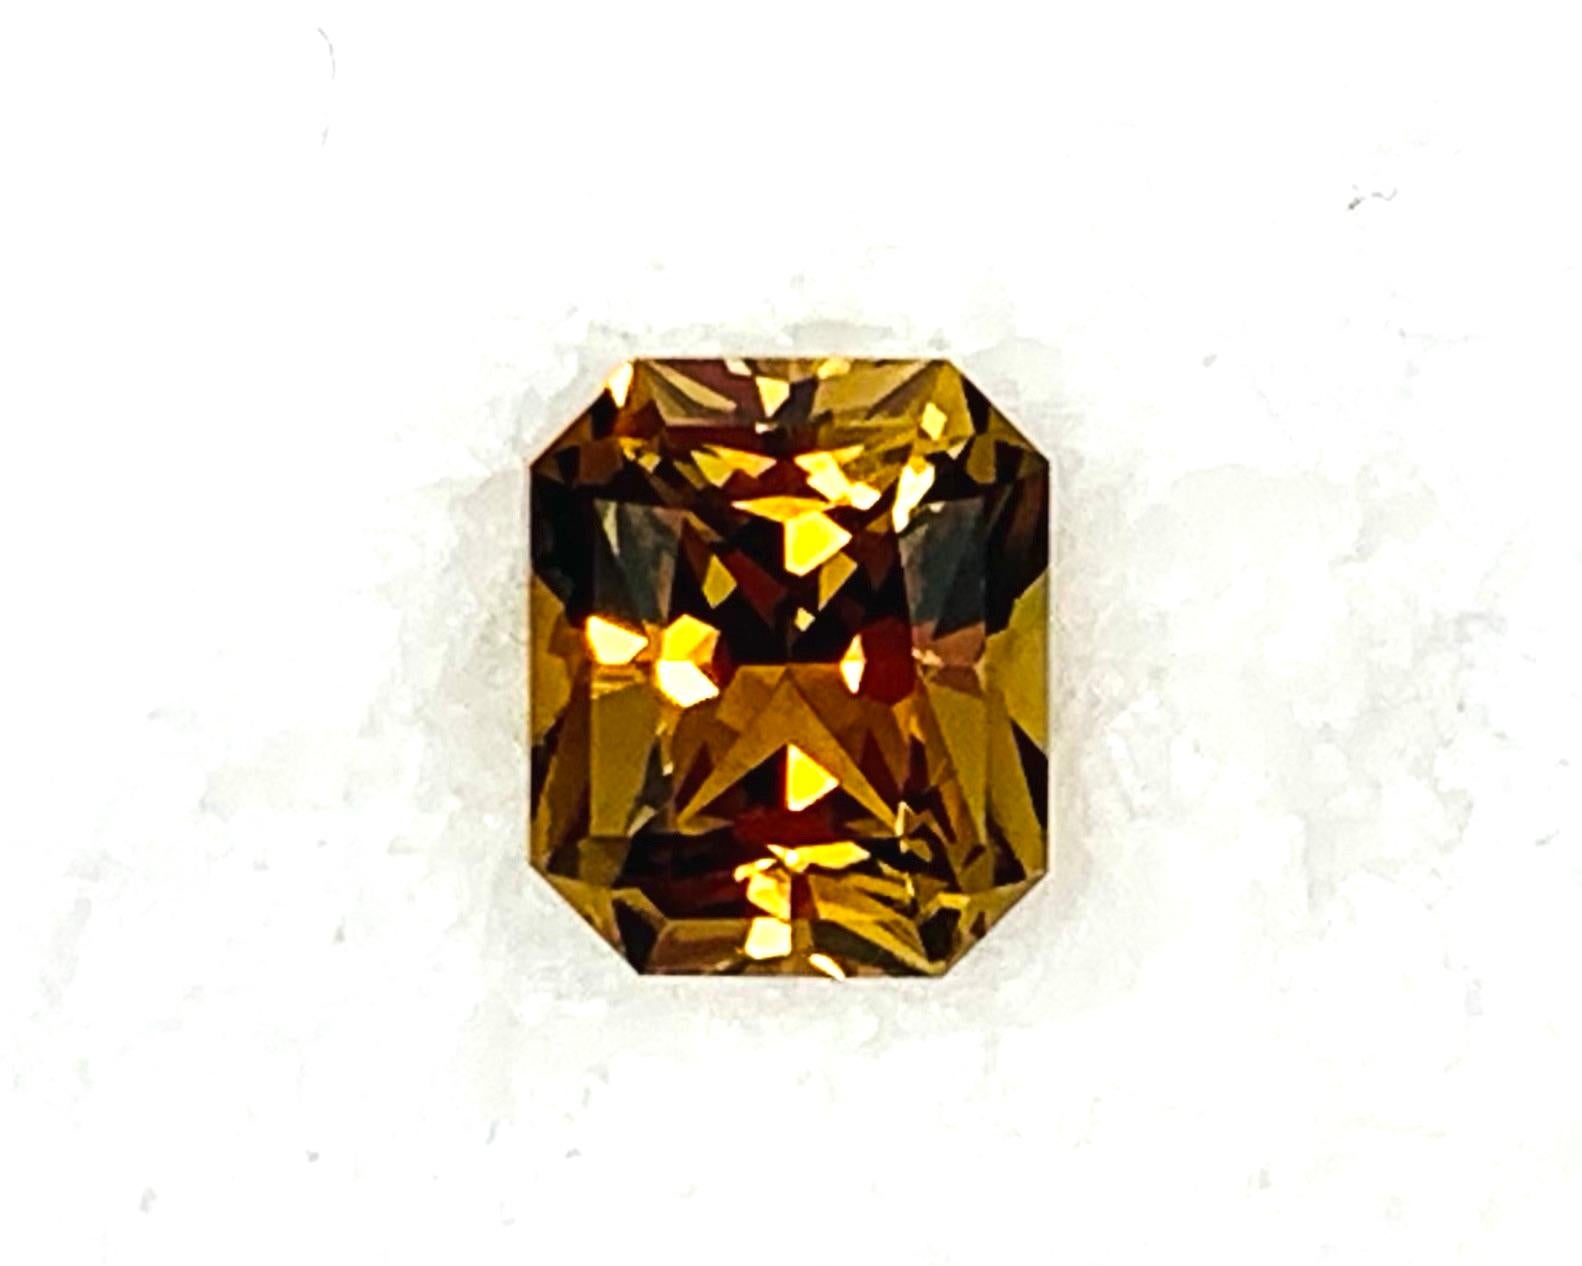 Zircon is one of the oldest precious minerals known to man, and this golden zircon would look amazing set as a ring, pendant or necklace enhancer. With its golden honey color and extraordinary clarity, this warm, orangish yellow gemstone has been